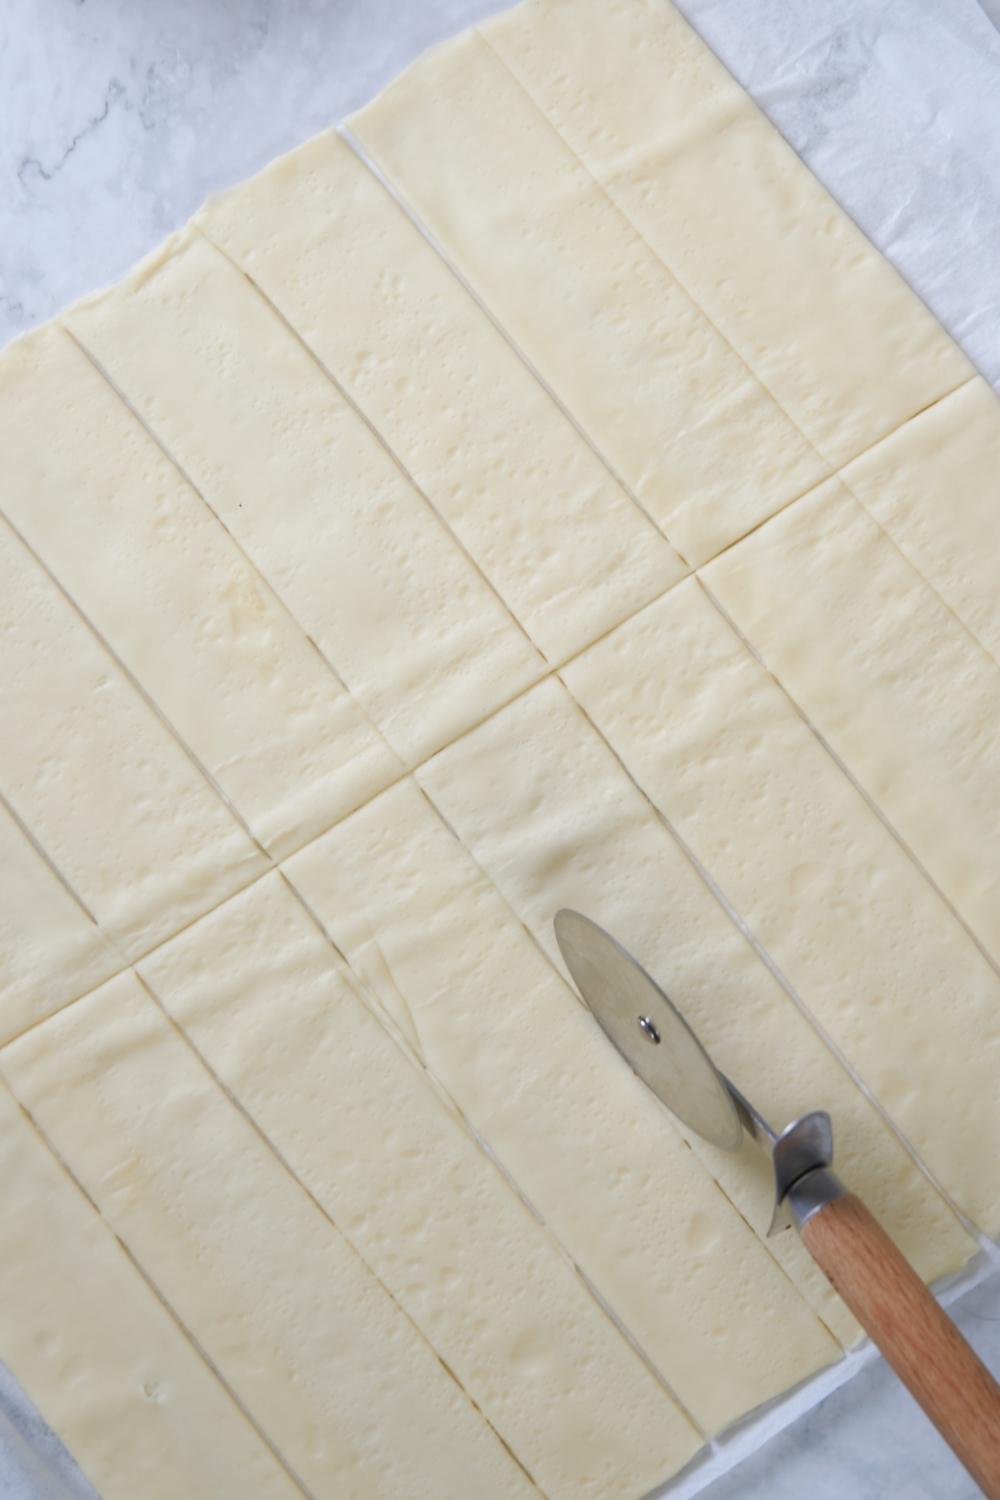 A parchment paper with pizza dough on it. A pizza cutter is cutting the dough into strips.